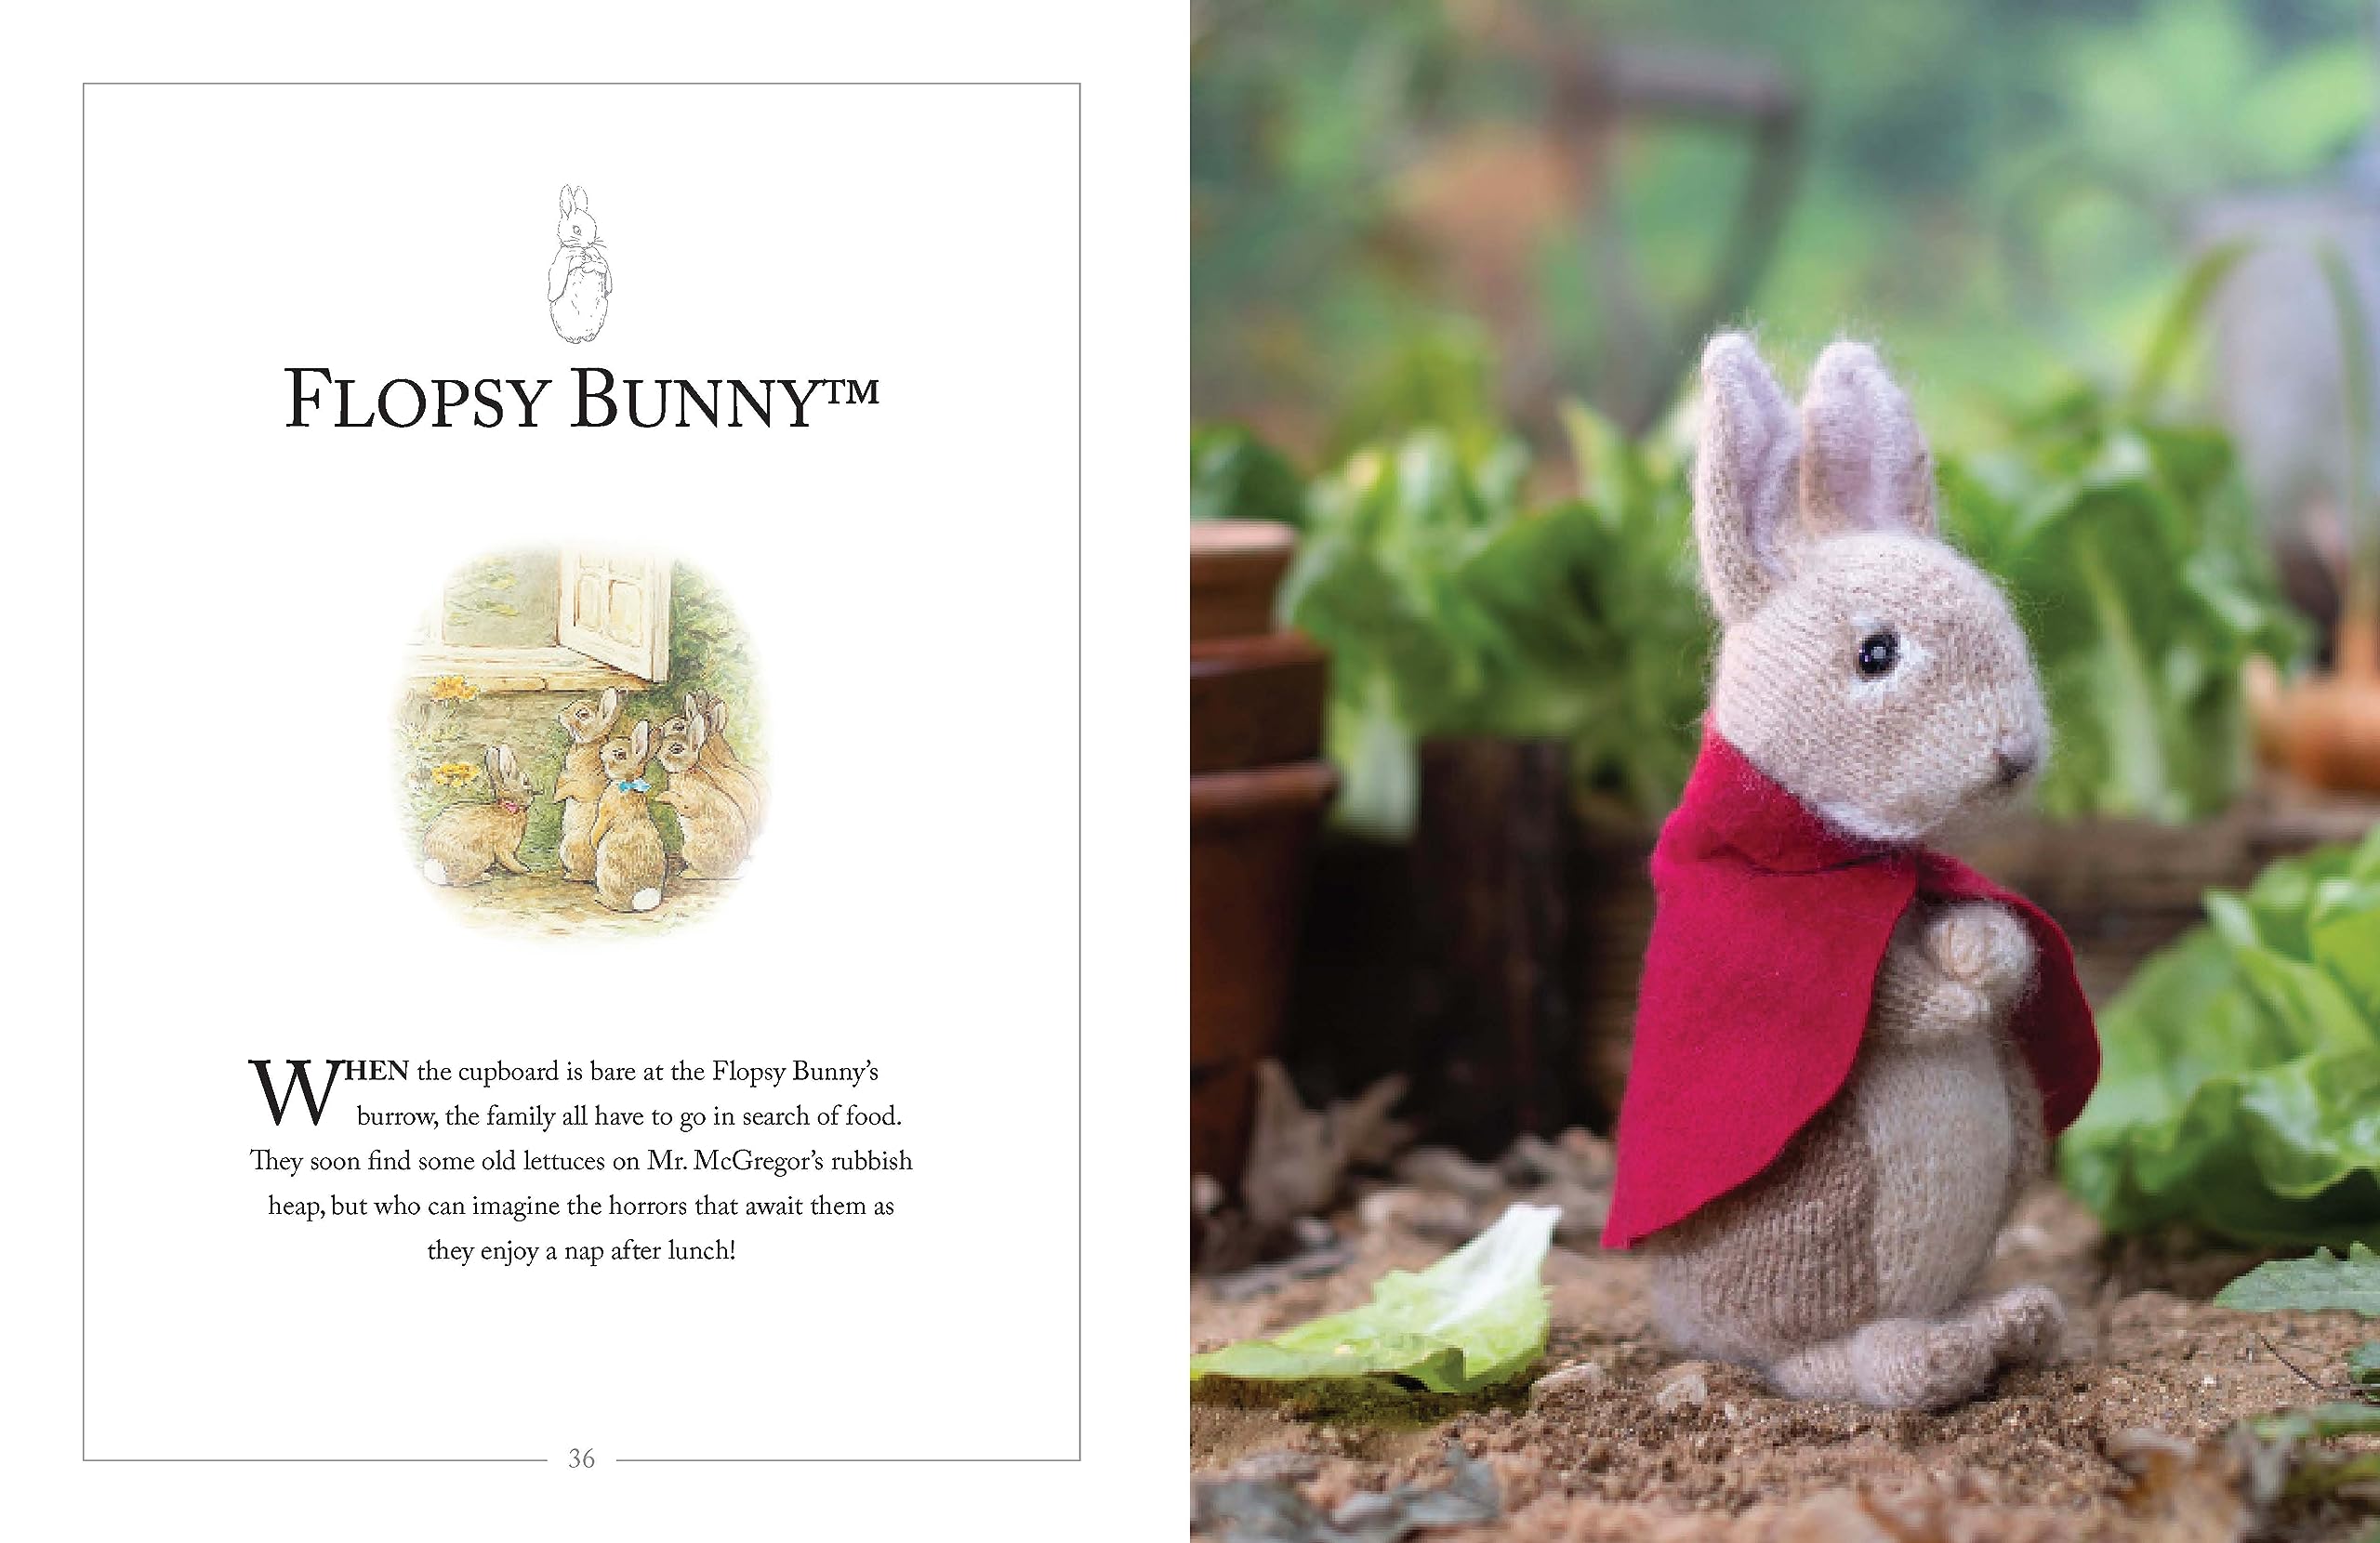 Knitting Peter Rabbit™: 12 Toy Knitting Patterns from the Tales of Beatrix Potter (World of Peter Rabbit)